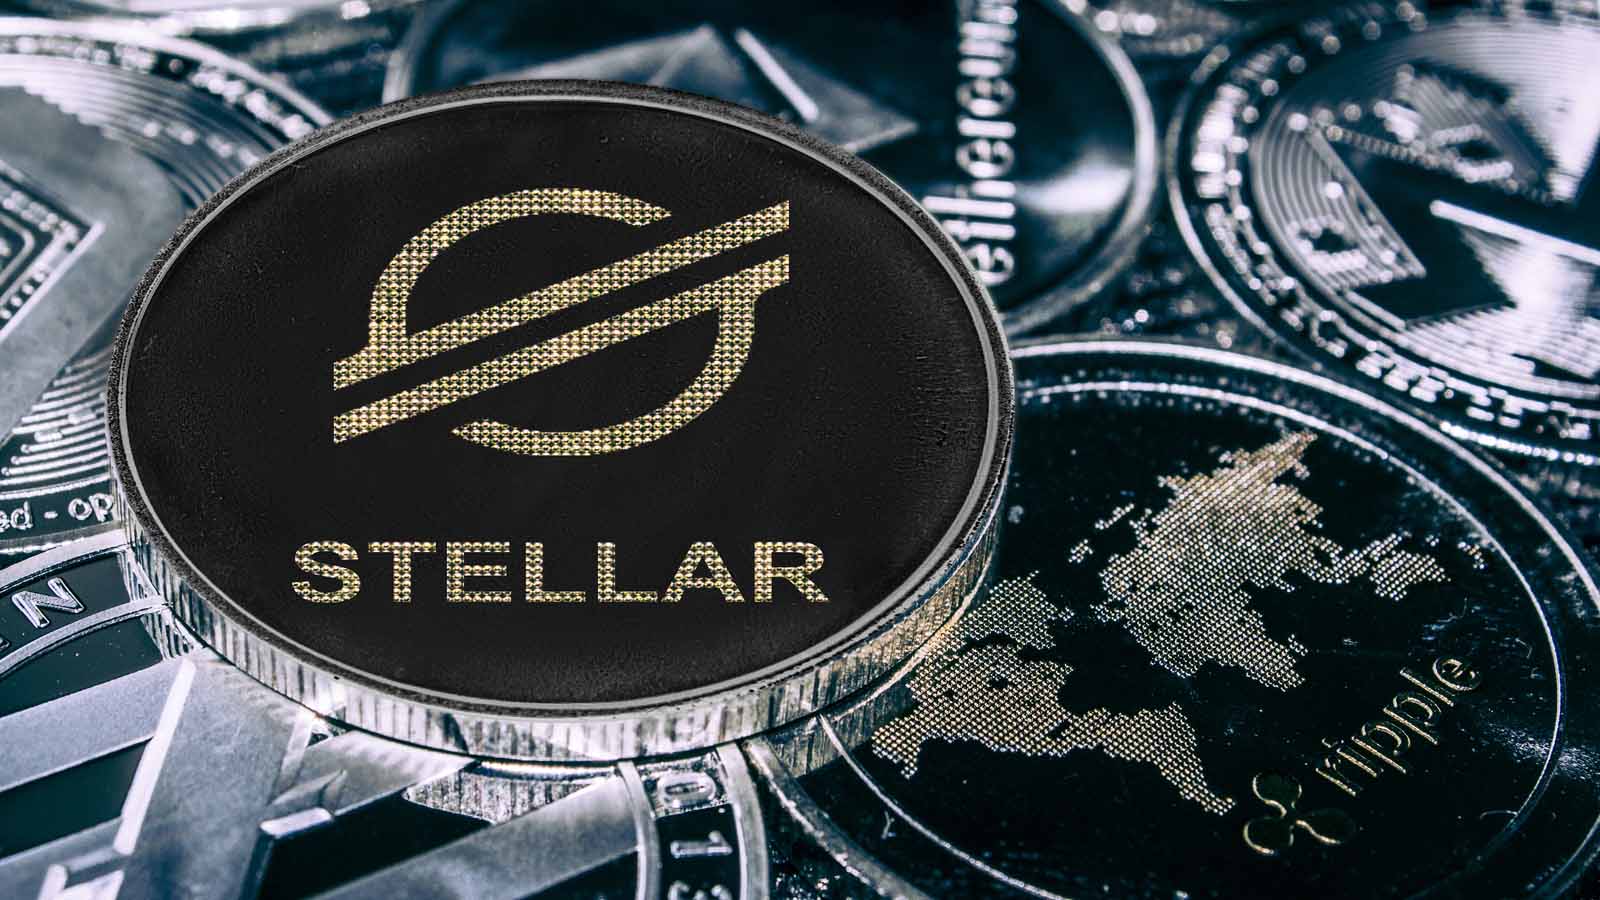 Stellar price today, XLM to USD live price, marketcap and chart | CoinMarketCap